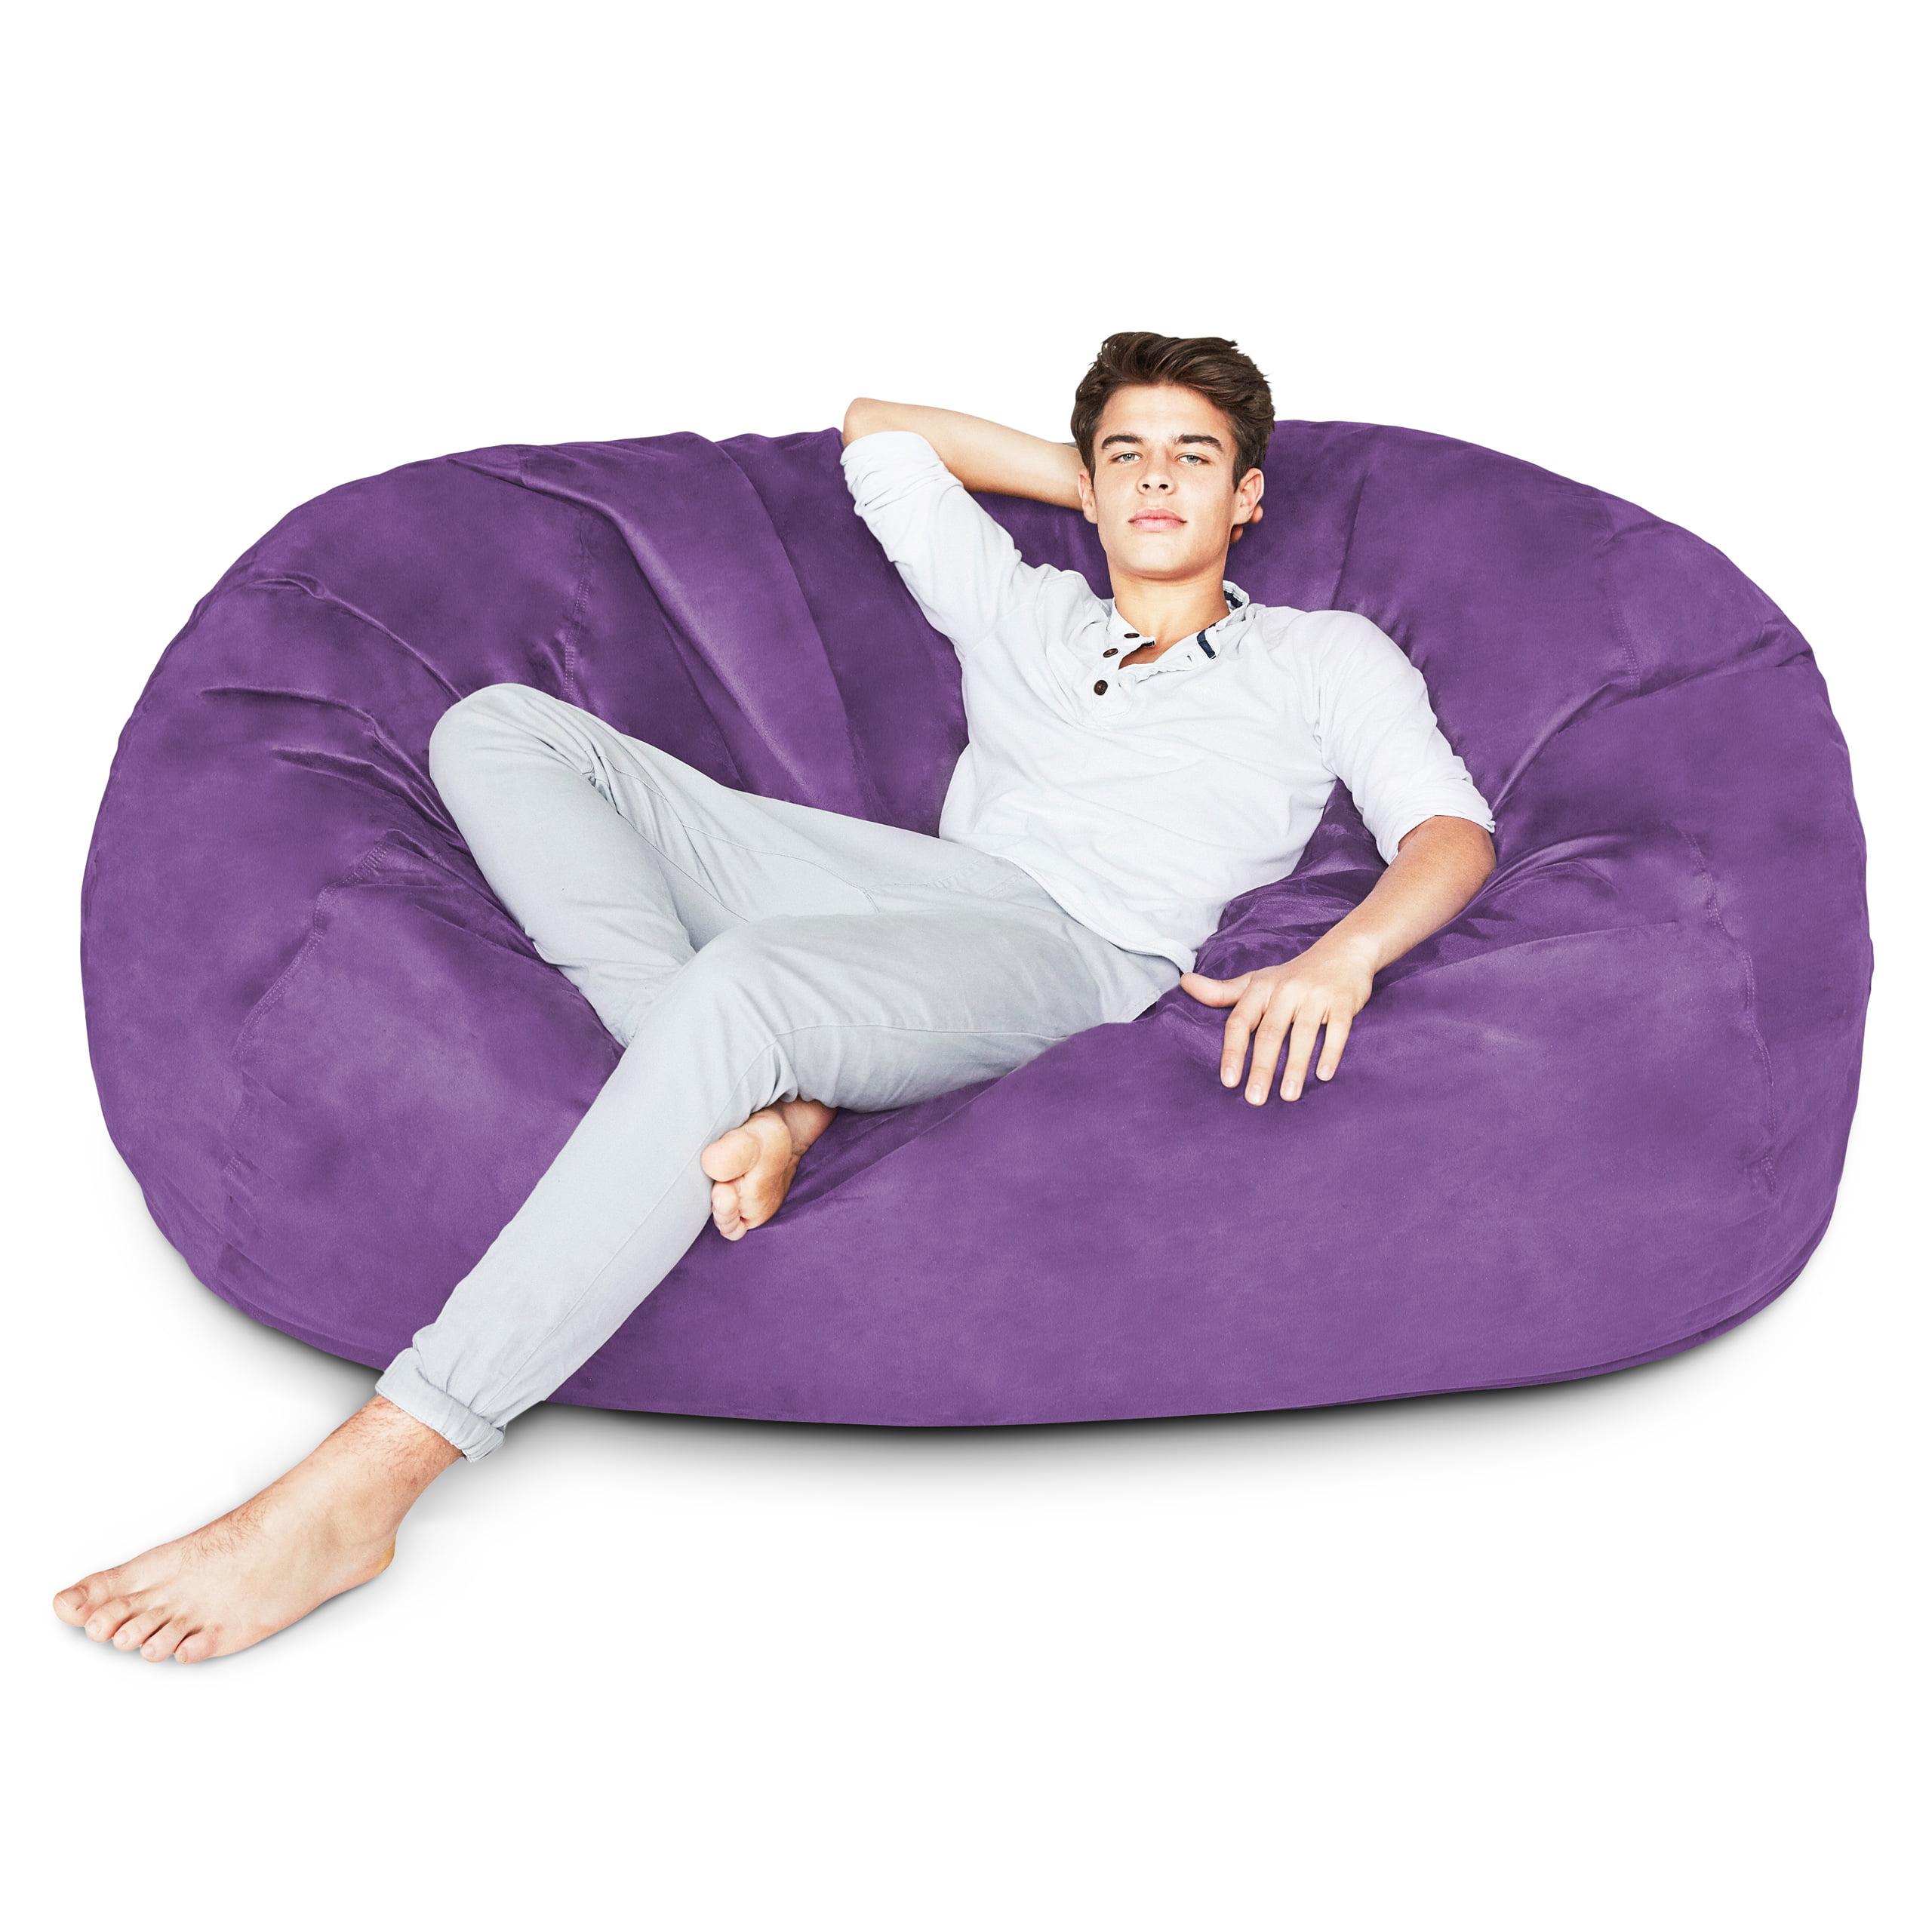 Lumaland Luxury 6Foot Bean Bag Chair with Microsuede